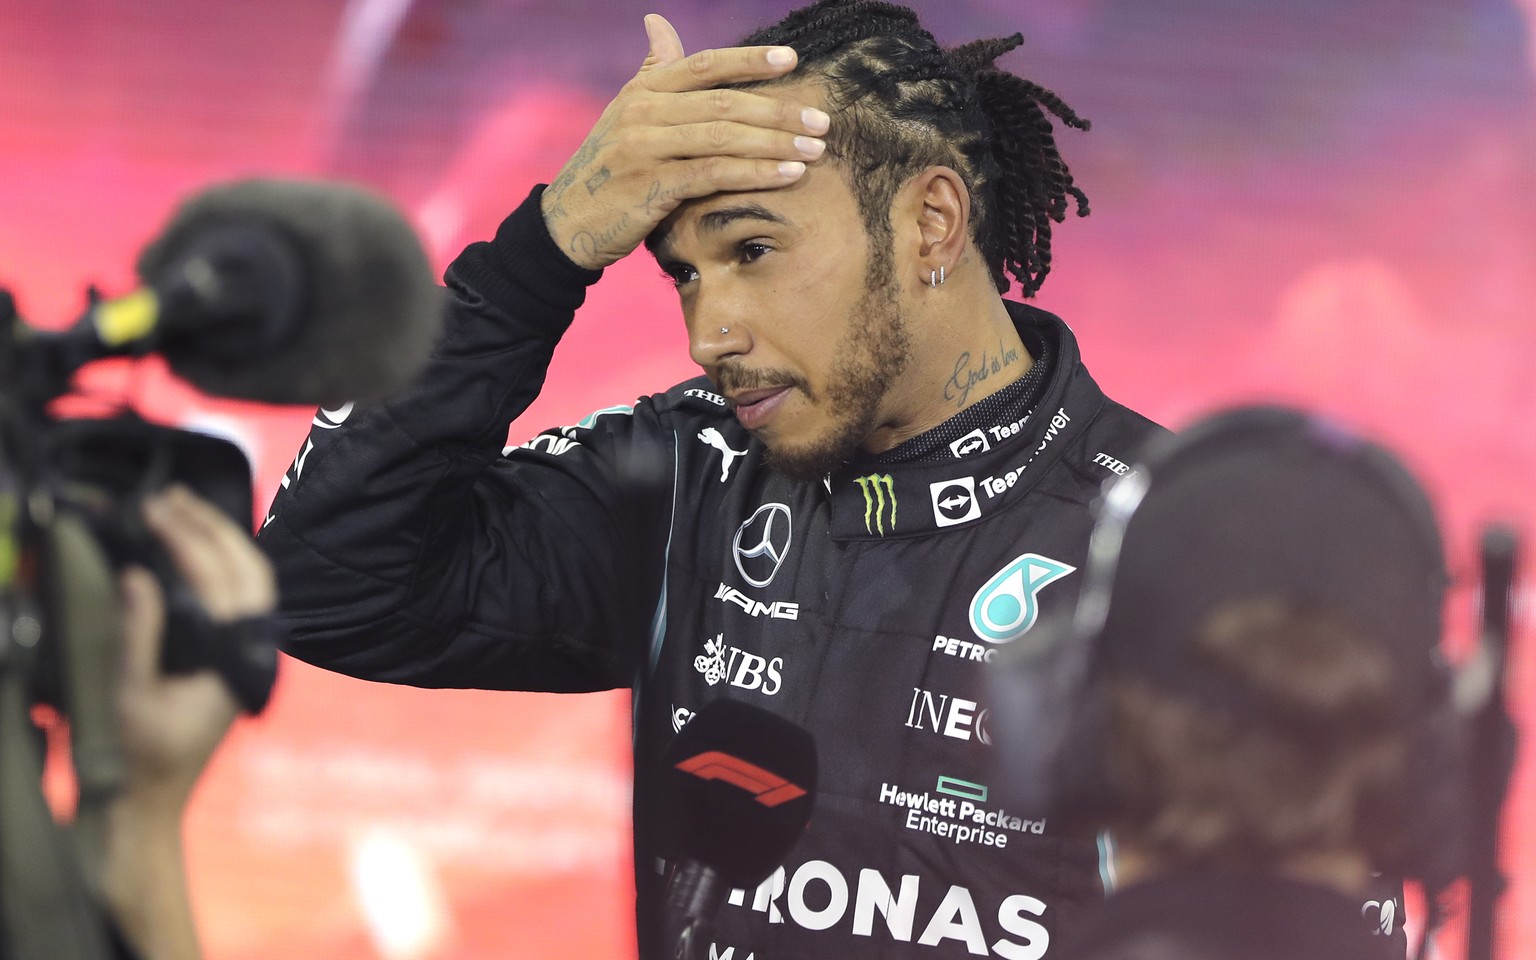 FILE - Mercedes driver Lewis Hamilton of Britain reacts after finishing second in the Formula One Abu Dhabi Grand Prix in Abu Dhabi, United Arab Emirates, Sunday, Dec. 12. 2021. After losing the Formu ...